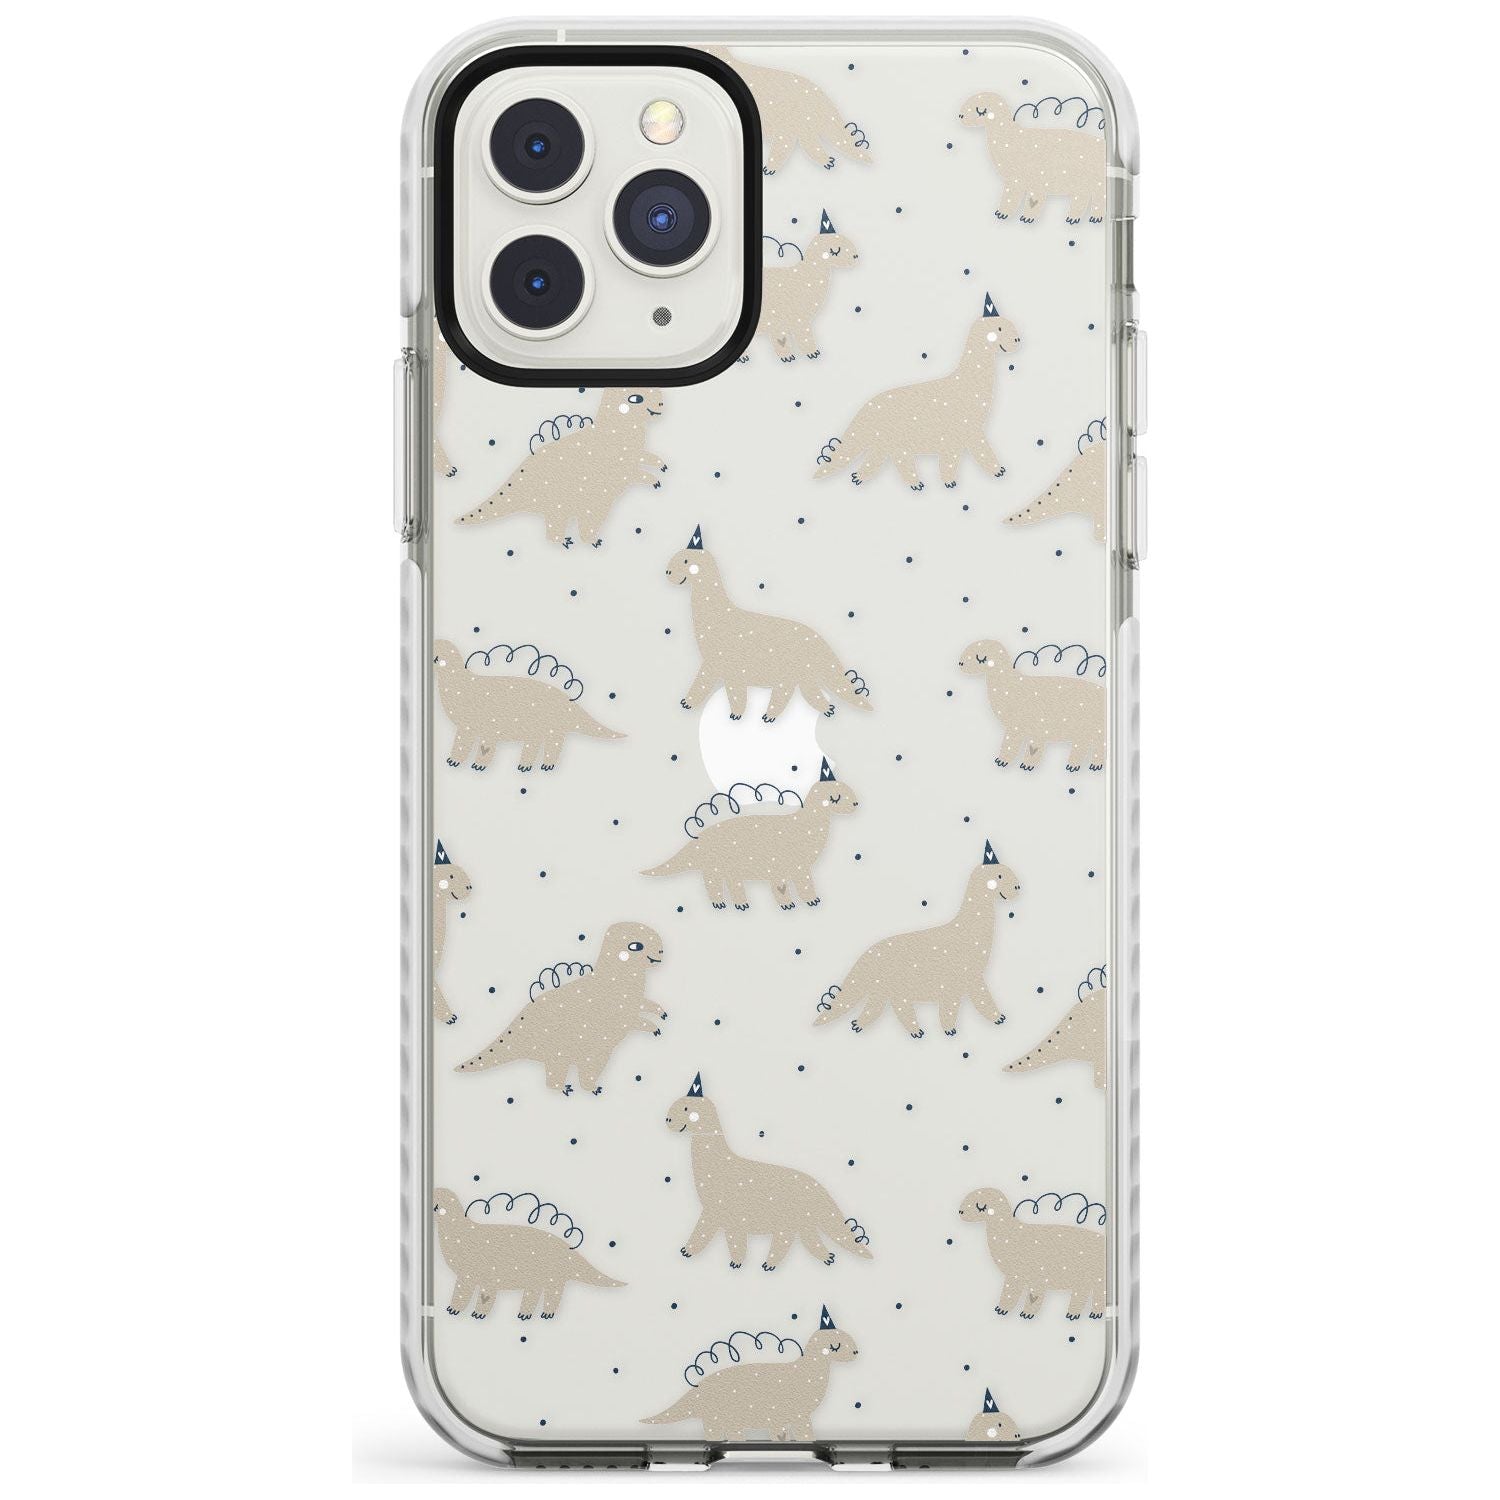 Adorable Dinosaurs Pattern (Clear) Impact Phone Case for iPhone 11 Pro Max